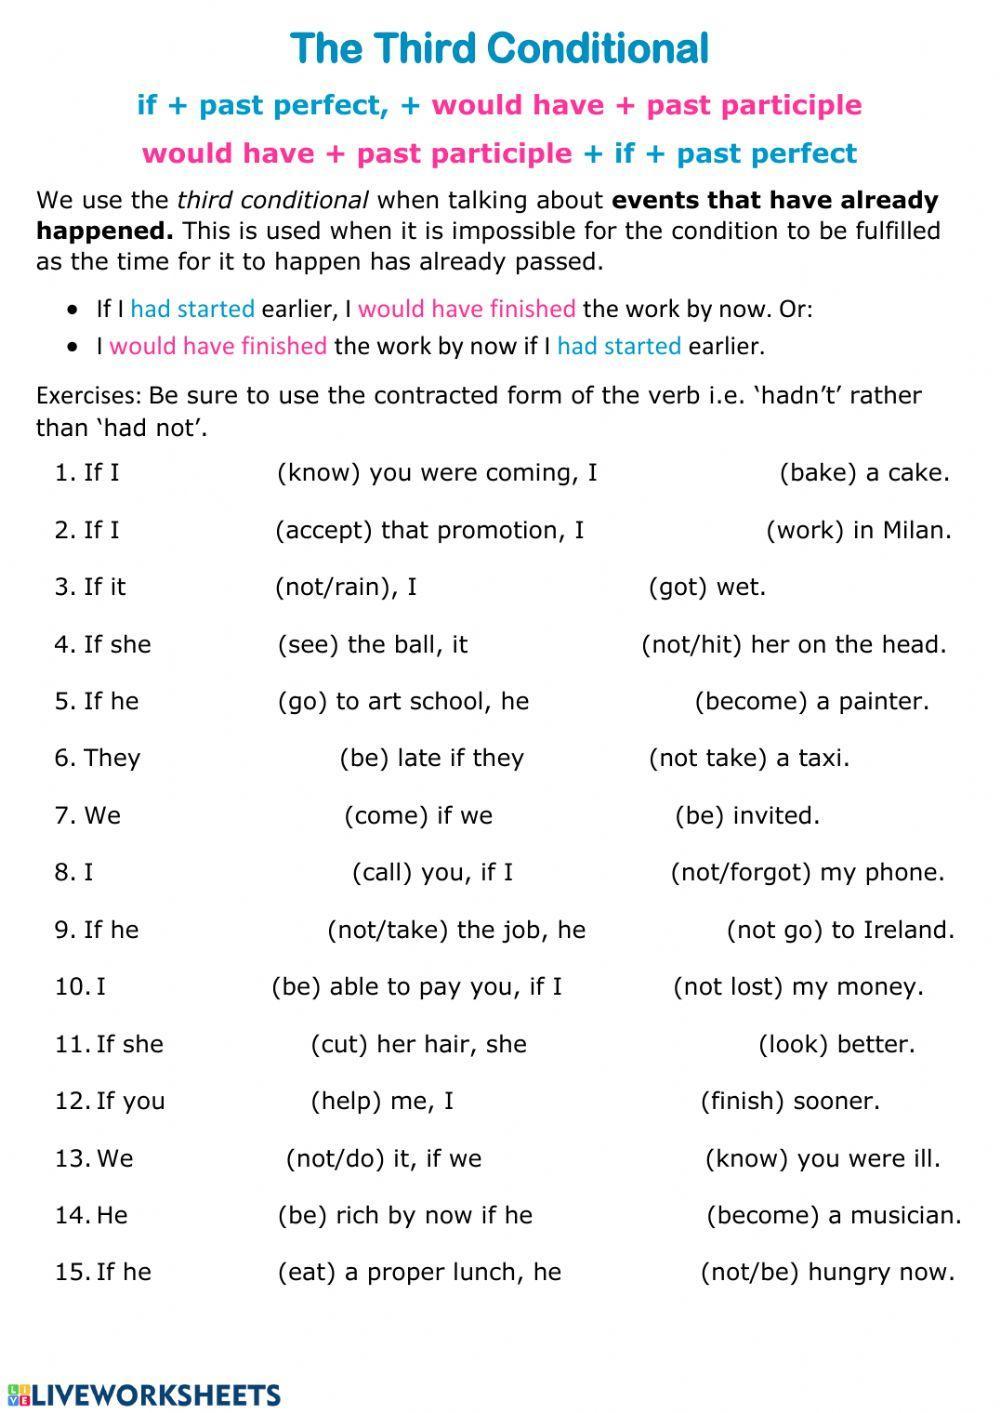 The Third Conditional worksheet